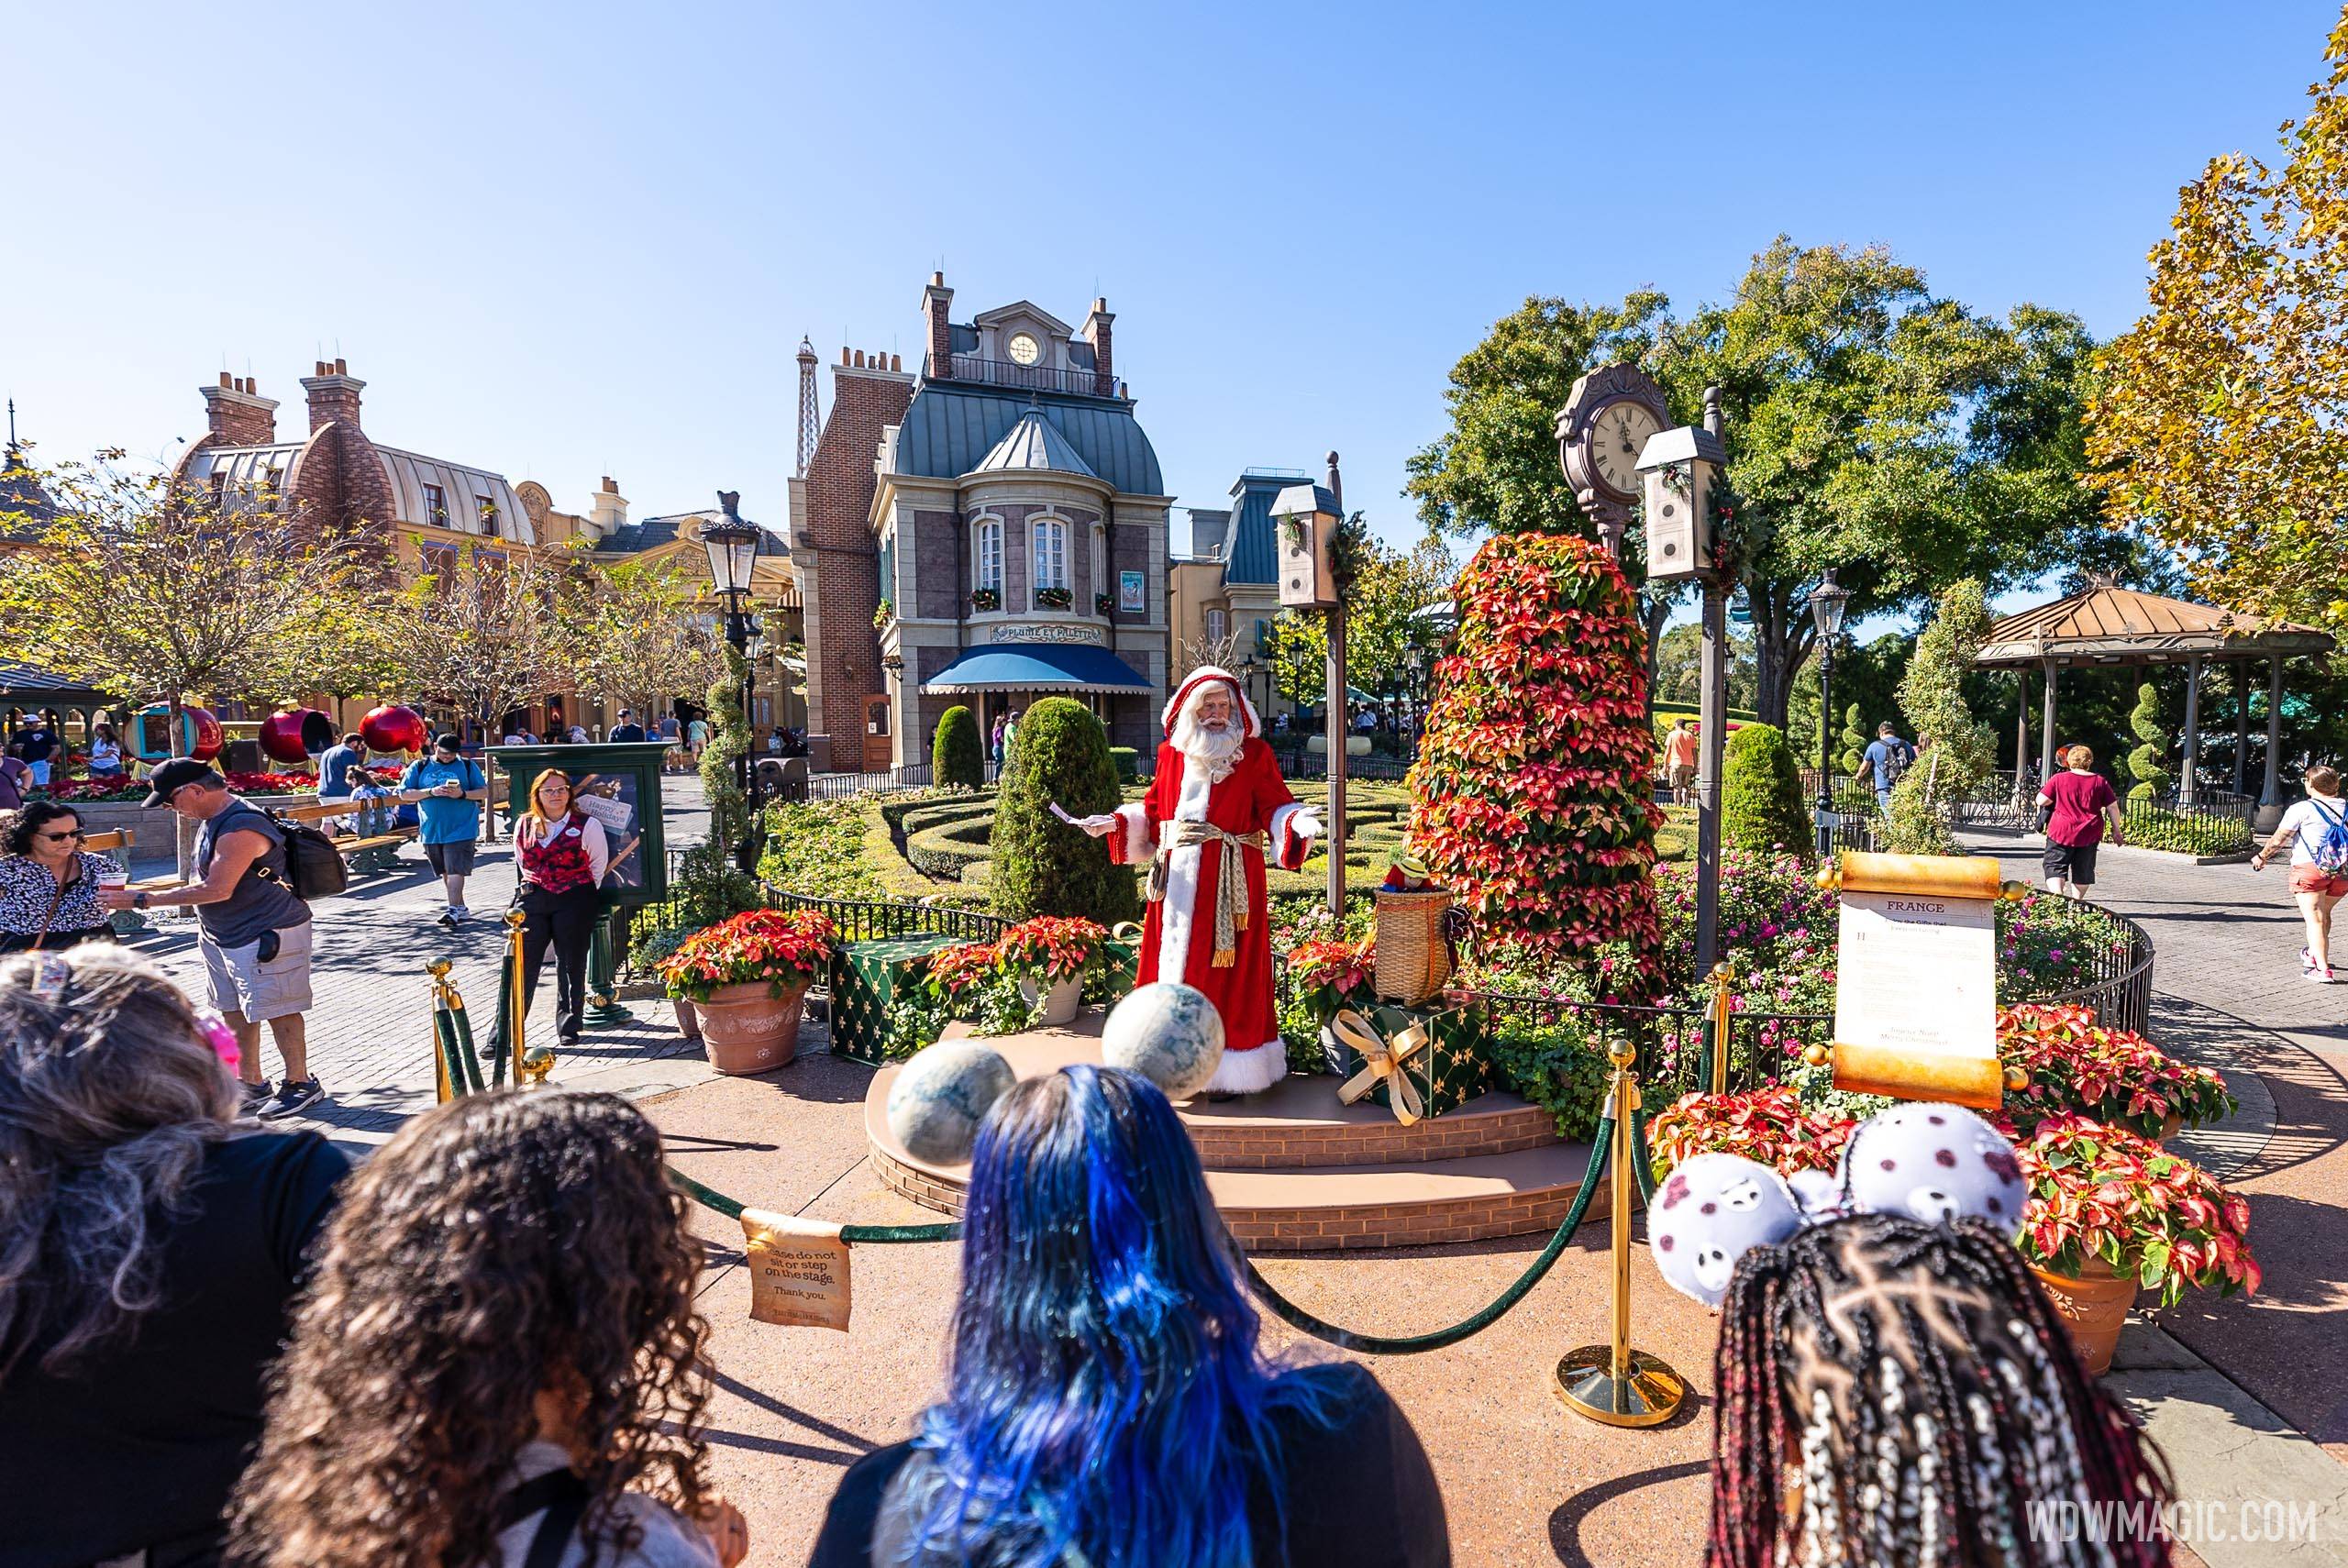 Full Holiday Storyteller line-up and schedule for the 2022 EPCOT International Festival of the Holidays